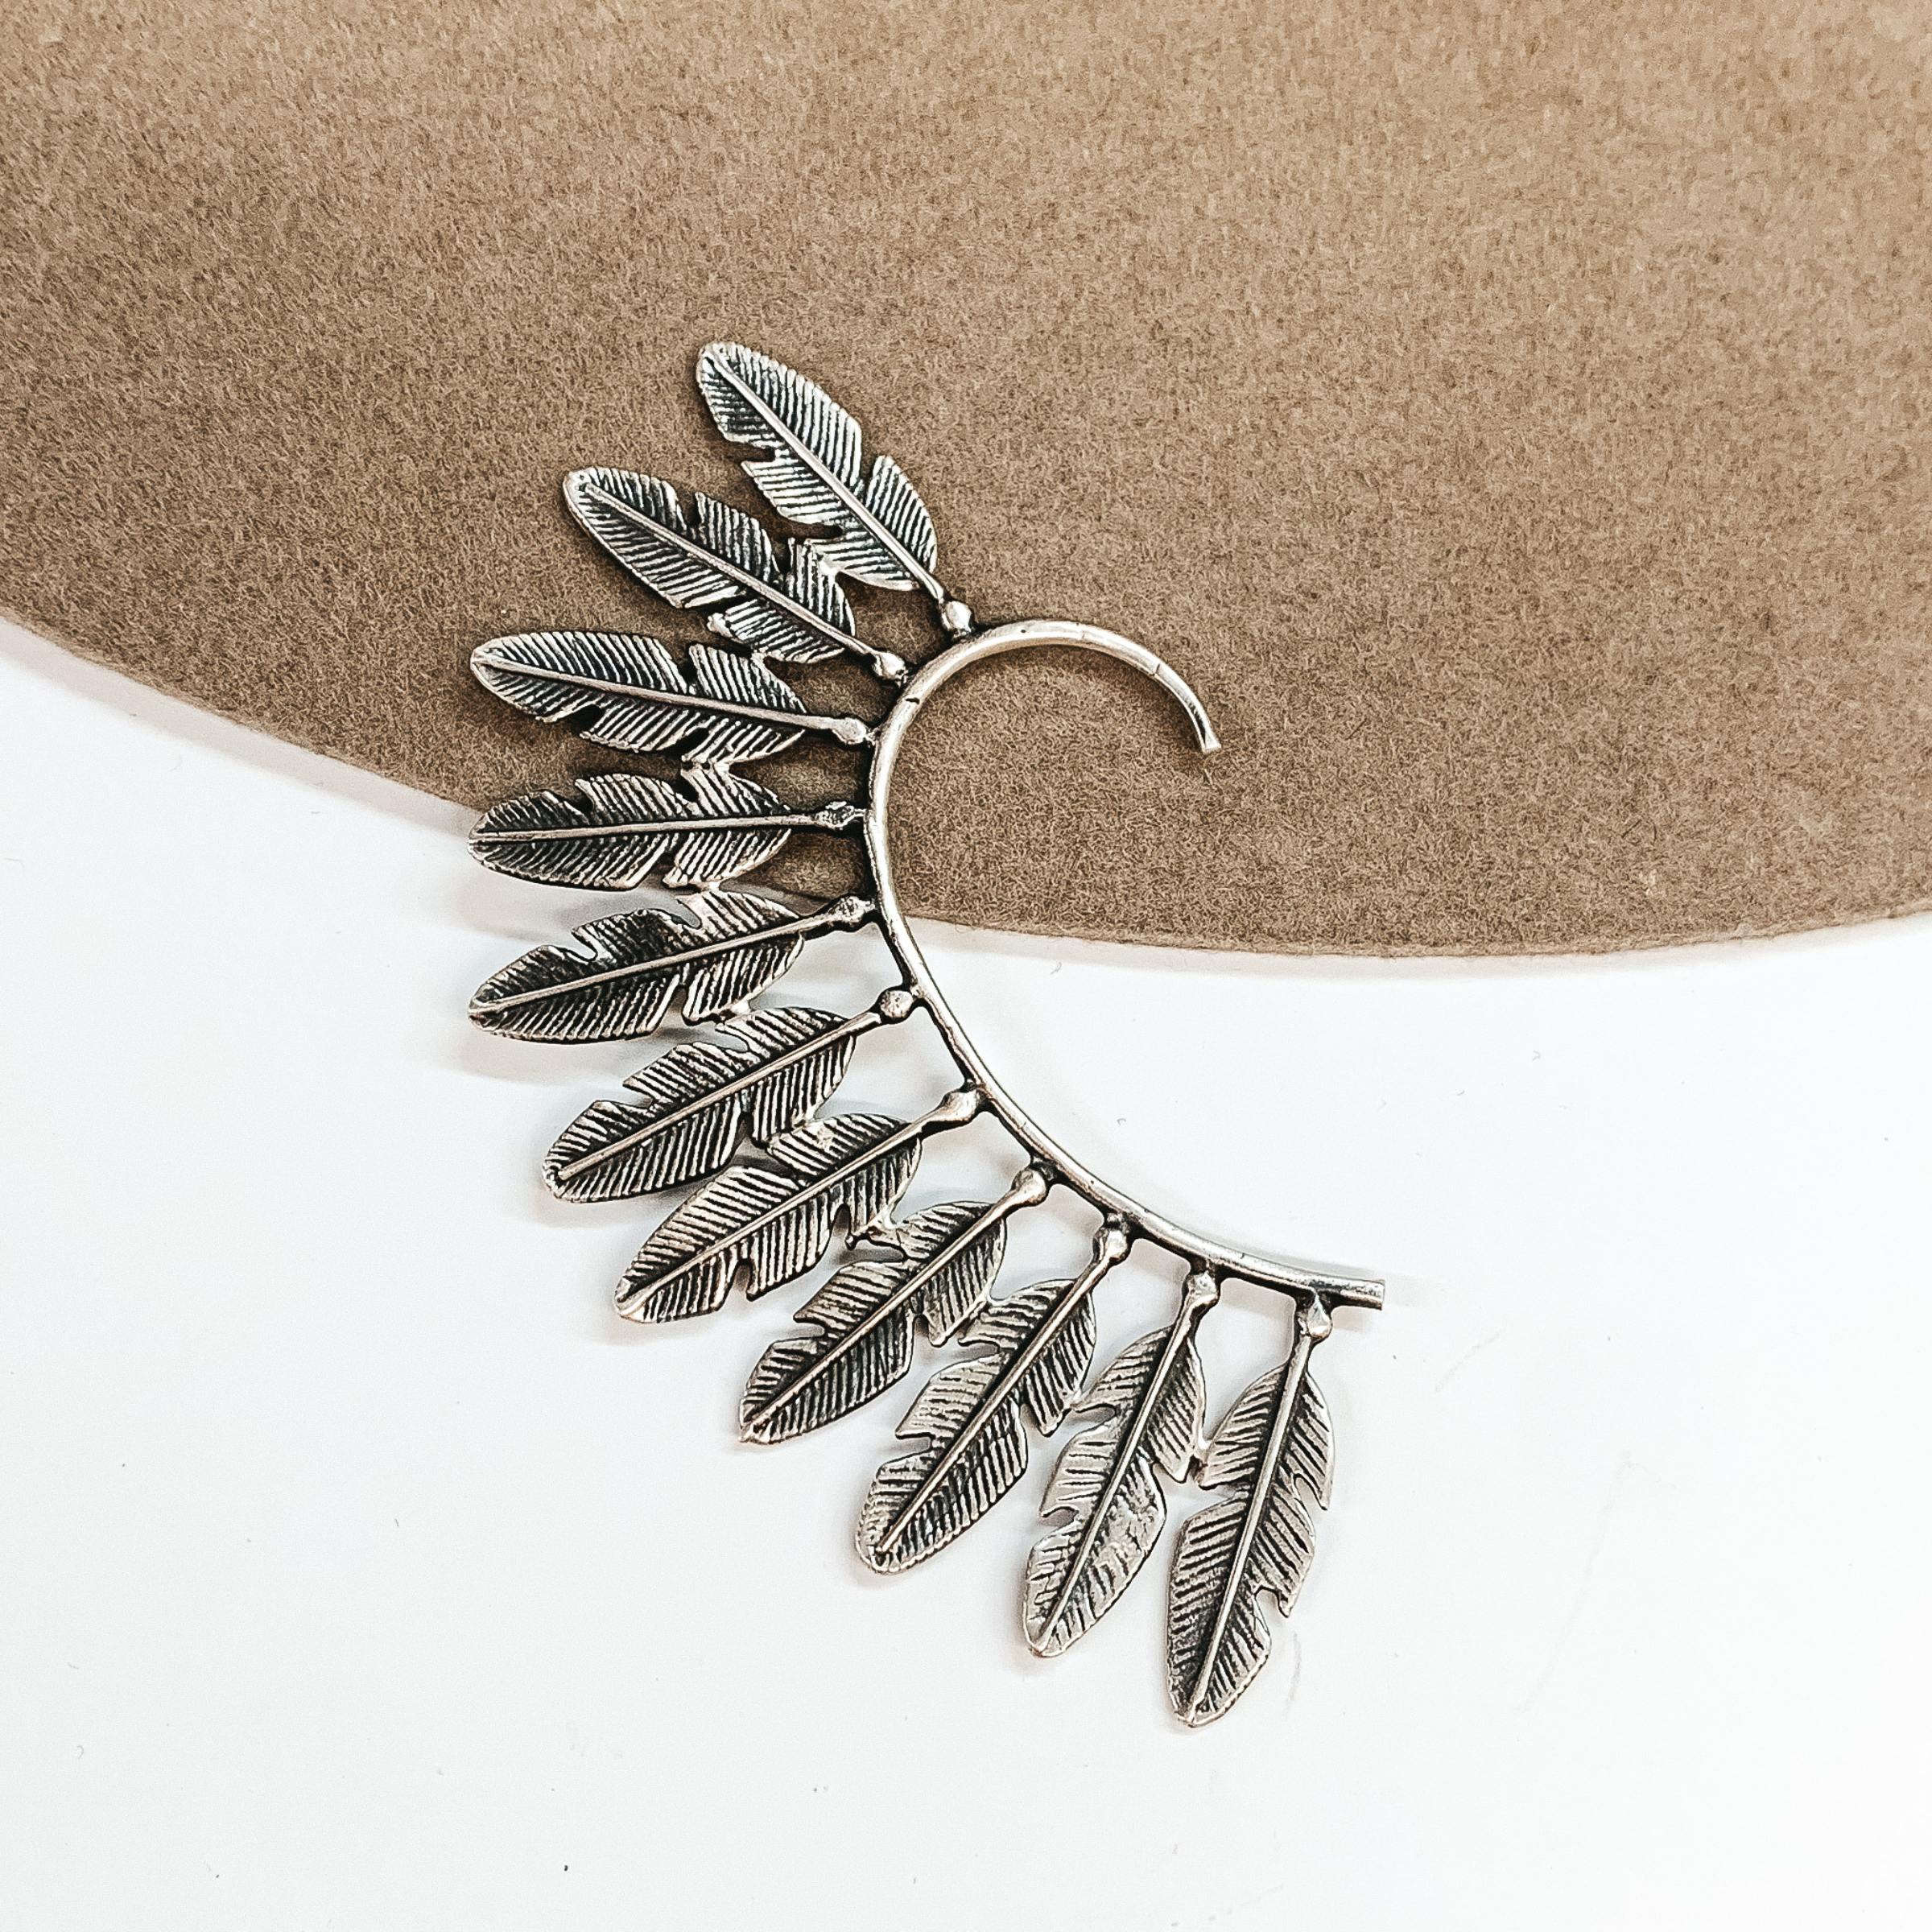 Silver ear cuff with silver feathers outlining the outside of the ear cuff. This earring cuff is pictured on a tan and white background. 